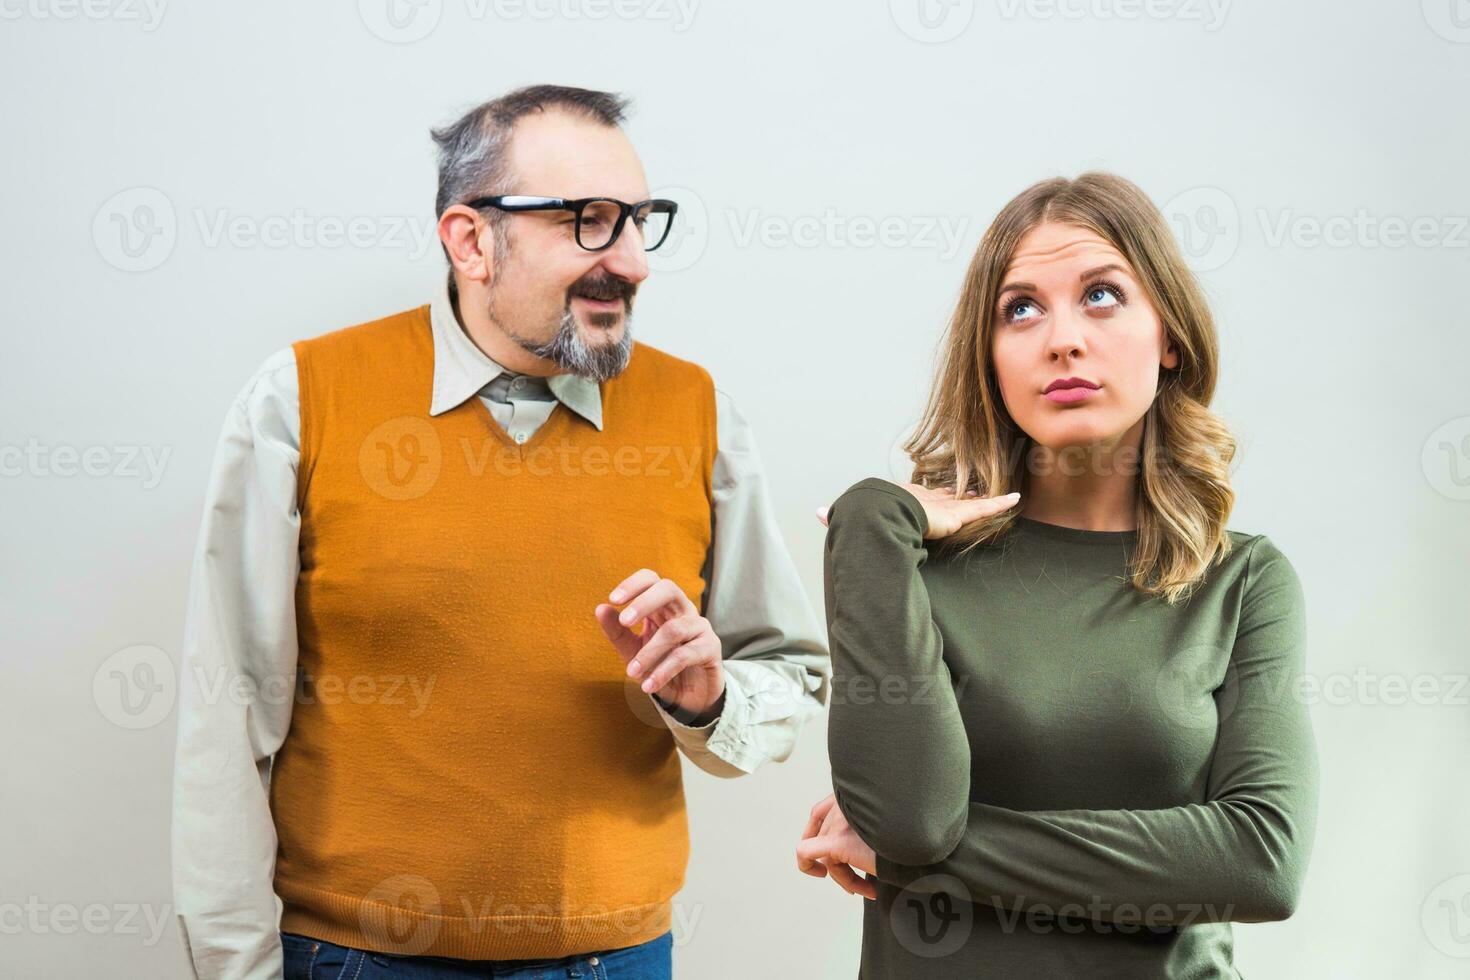 Nerdy man is trying to get beautiful woman's attention but she is not interested and angry ignore him photo